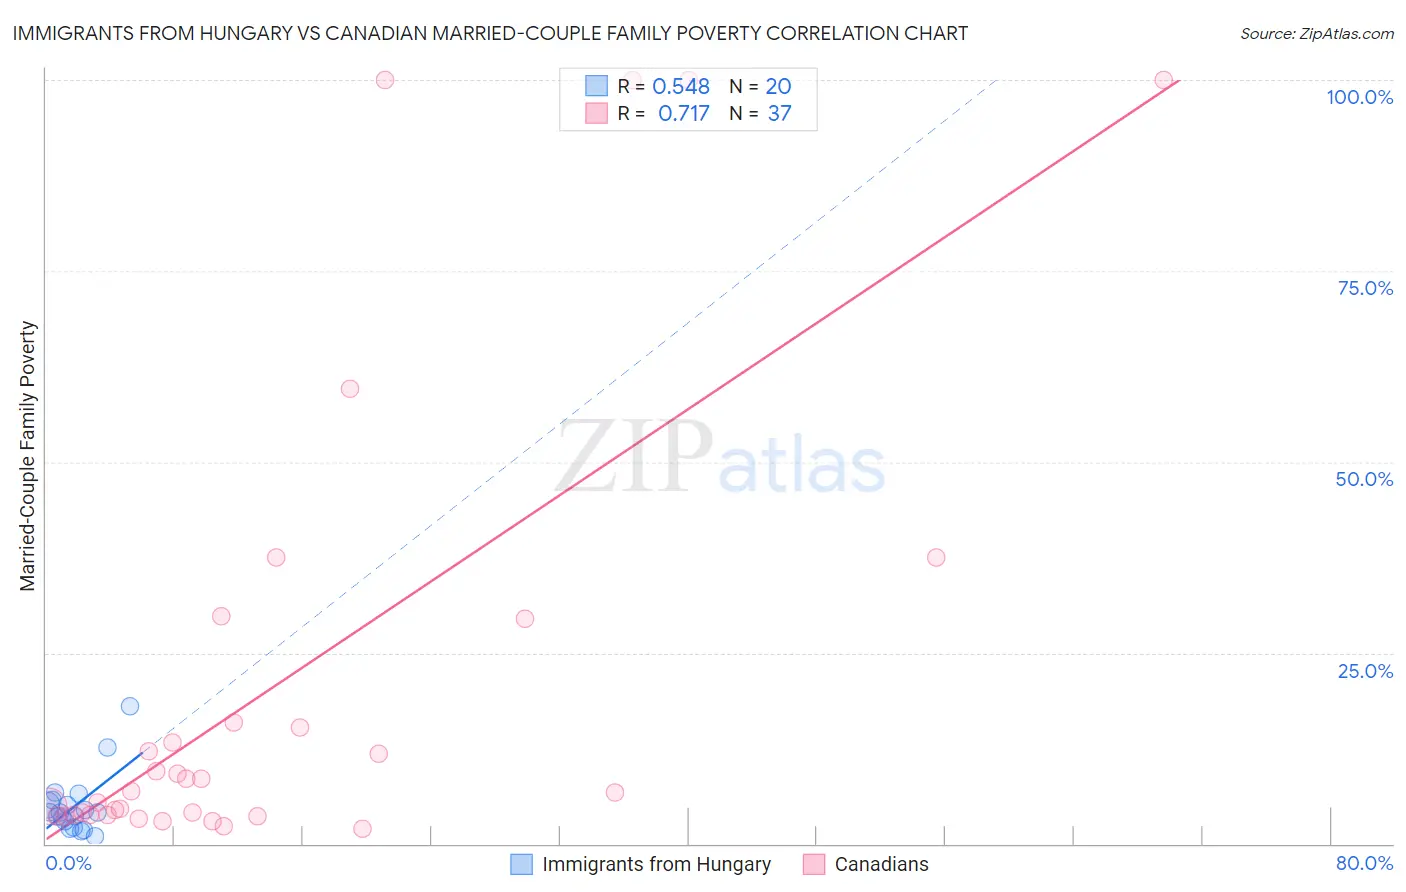 Immigrants from Hungary vs Canadian Married-Couple Family Poverty